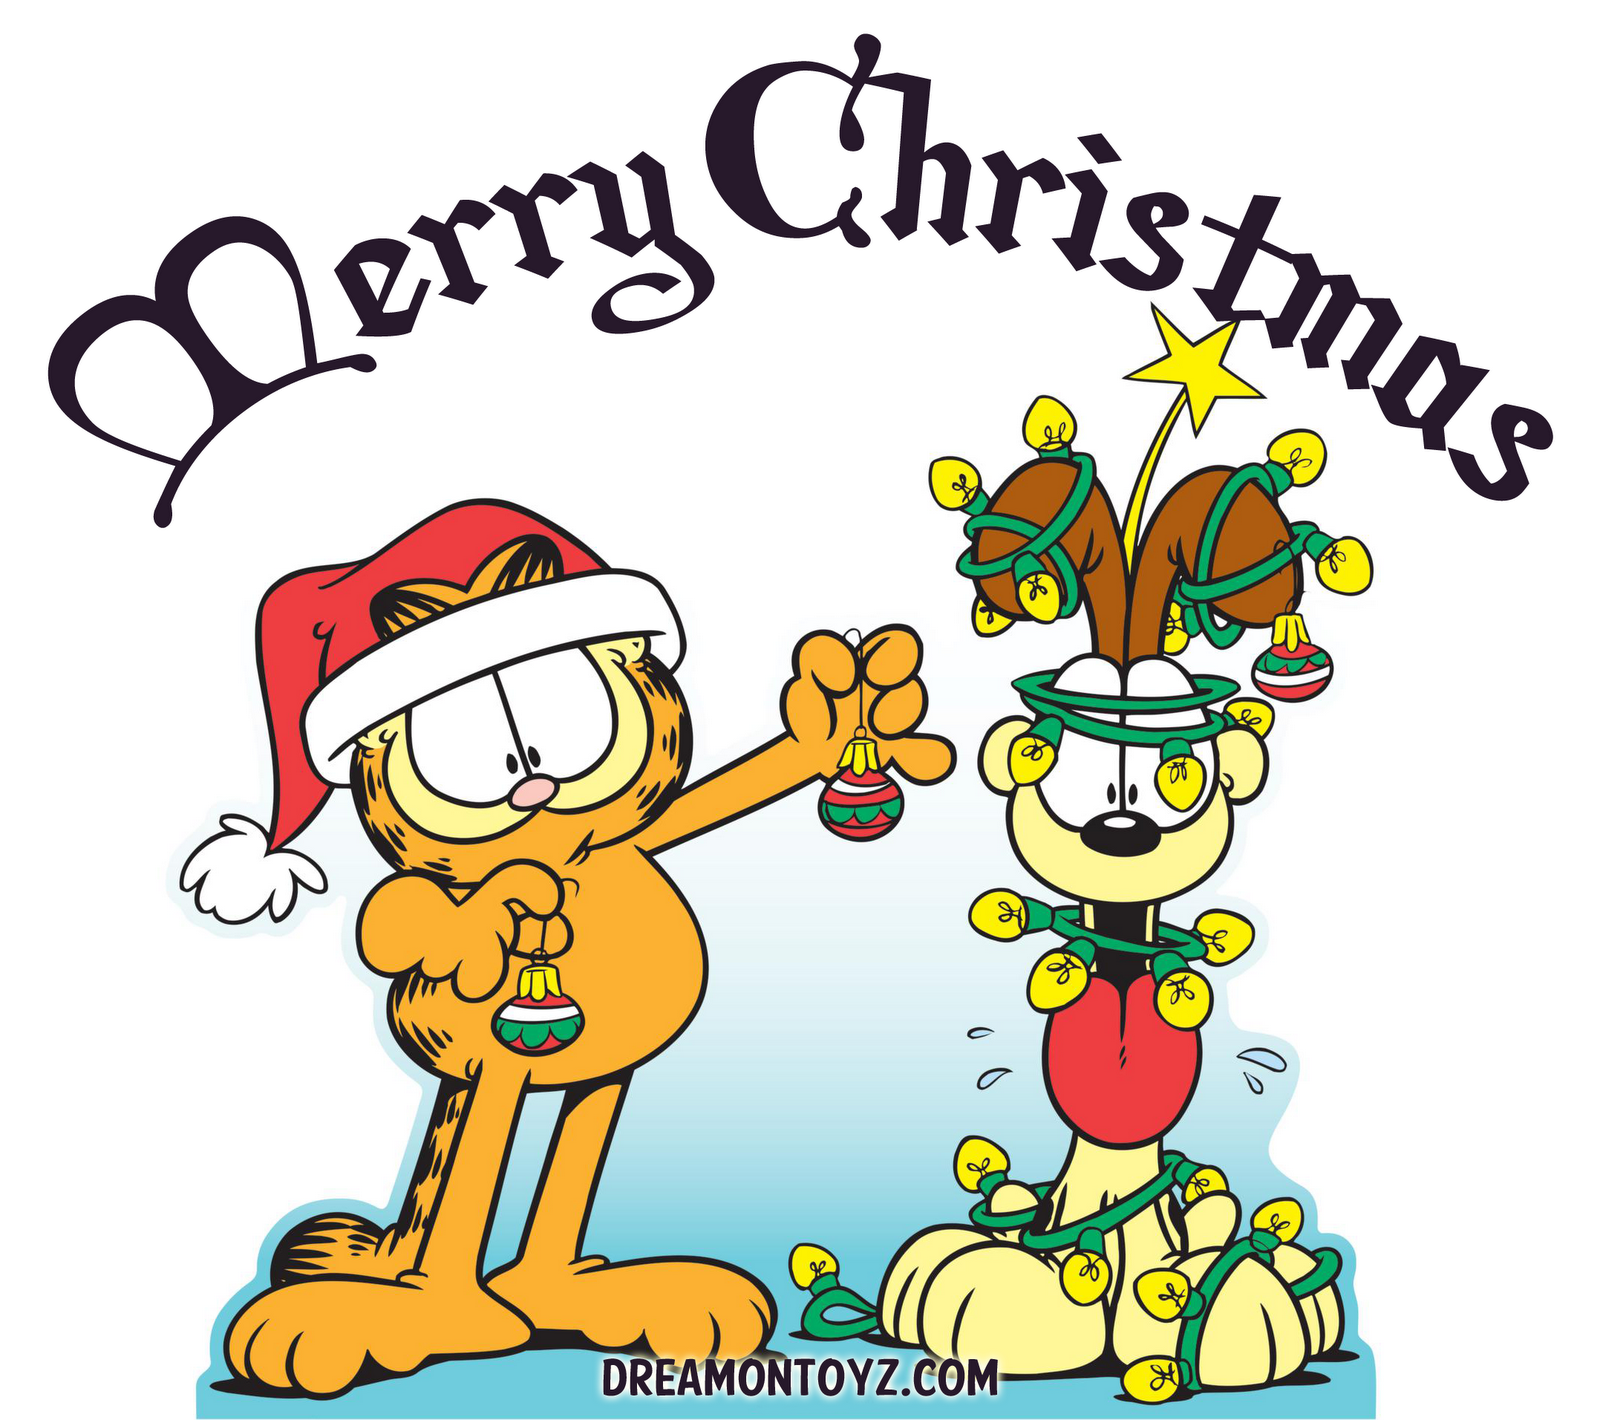 Merry Christmas Cartoon Pictures Cliparts.co